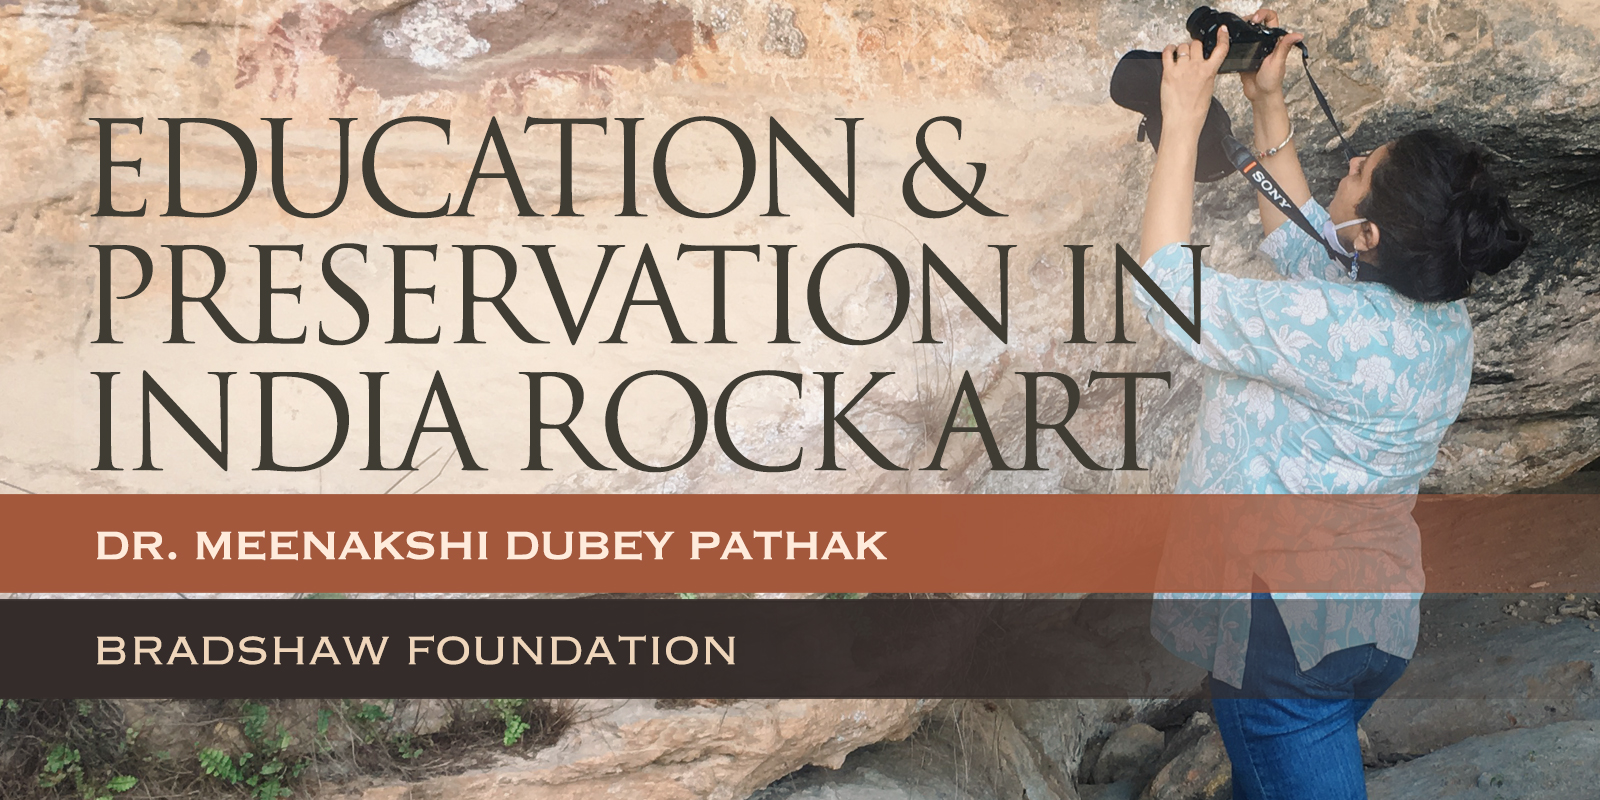 The Rock Art and Tribal Art of Chhattisgarh State in India